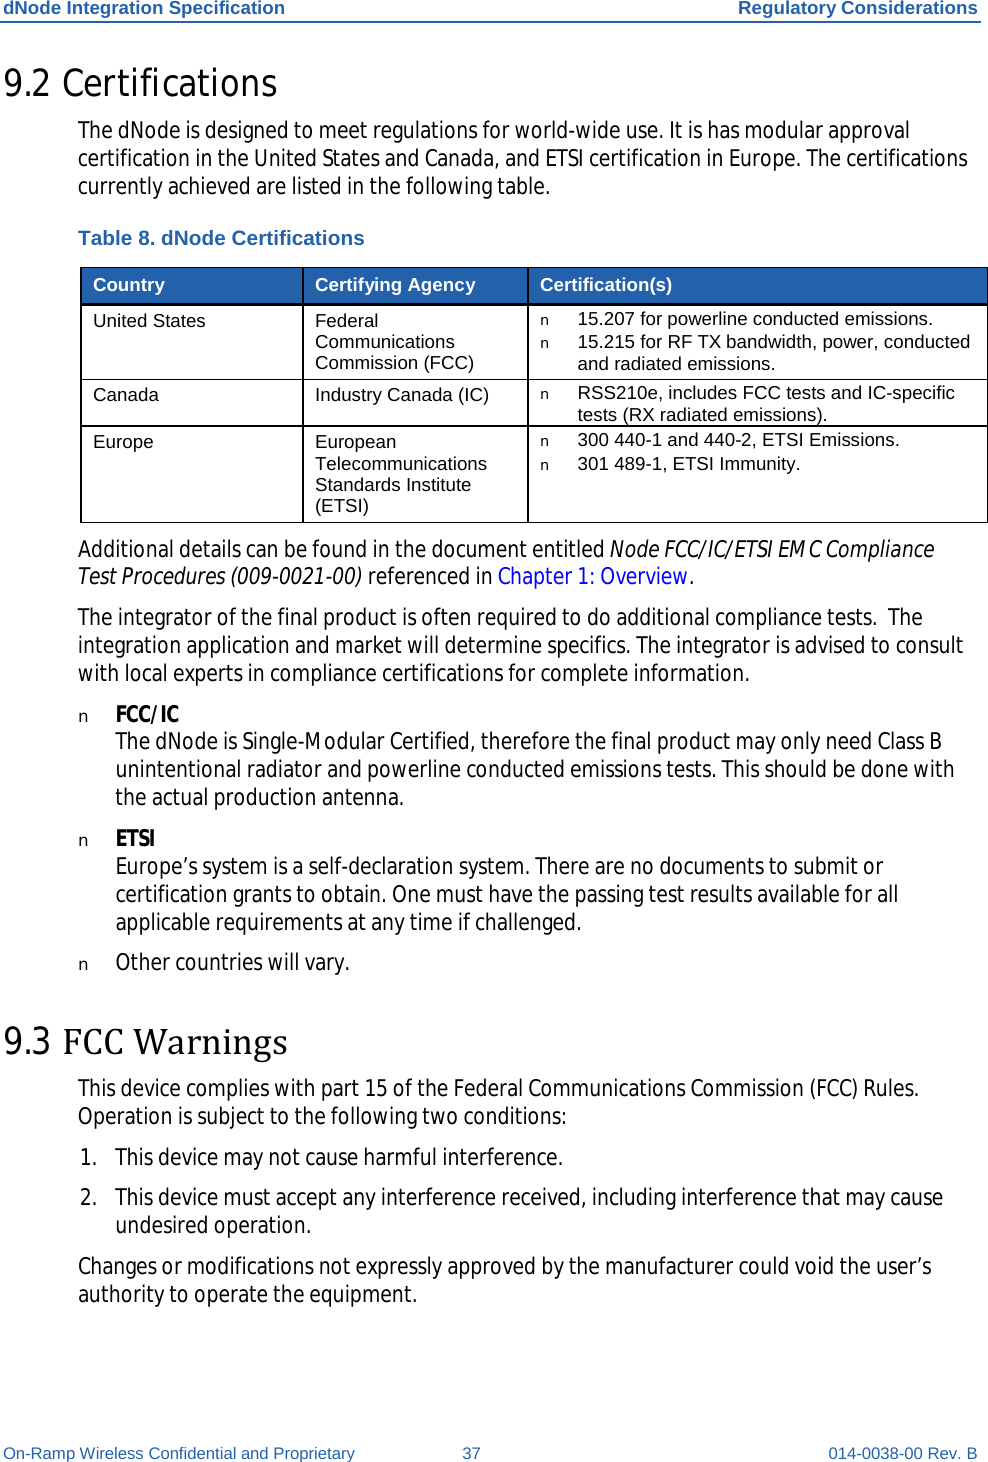 dNode Integration Specification Regulatory Considerations On-Ramp Wireless Confidential and Proprietary 37 014-0038-00 Rev. B 9.2 Certifications The dNode is designed to meet regulations for world-wide use. It is has modular approval certification in the United States and Canada, and ETSI certification in Europe. The certifications currently achieved are listed in the following table. Table 8. dNode Certifications Country Certifying Agency Certification(s) United States Federal Communications Commission (FCC) n 15.207 for powerline conducted emissions. n 15.215 for RF TX bandwidth, power, conducted and radiated emissions. Canada Industry Canada (IC) n RSS210e, includes FCC tests and IC-specific tests (RX radiated emissions). Europe European Telecommunications Standards Institute (ETSI) n 300 440-1 and 440-2, ETSI Emissions. n 301 489-1, ETSI Immunity. Additional details can be found in the document entitled Node FCC/IC/ETSI EMC Compliance Test Procedures (009-0021-00) referenced in Chapter 1: Overview. The integrator of the final product is often required to do additional compliance tests.  The integration application and market will determine specifics. The integrator is advised to consult with local experts in compliance certifications for complete information. n FCC/IC The dNode is Single-Modular Certified, therefore the final product may only need Class B unintentional radiator and powerline conducted emissions tests. This should be done with the actual production antenna. n ETSI Europe’s system is a self-declaration system. There are no documents to submit or certification grants to obtain. One must have the passing test results available for all applicable requirements at any time if challenged. n Other countries will vary. 9.3 FCC Warnings This device complies with part 15 of the Federal Communications Commission (FCC) Rules. Operation is subject to the following two conditions:  1. This device may not cause harmful interference. 2. This device must accept any interference received, including interference that may cause undesired operation. Changes or modifications not expressly approved by the manufacturer could void the user’s authority to operate the equipment. 